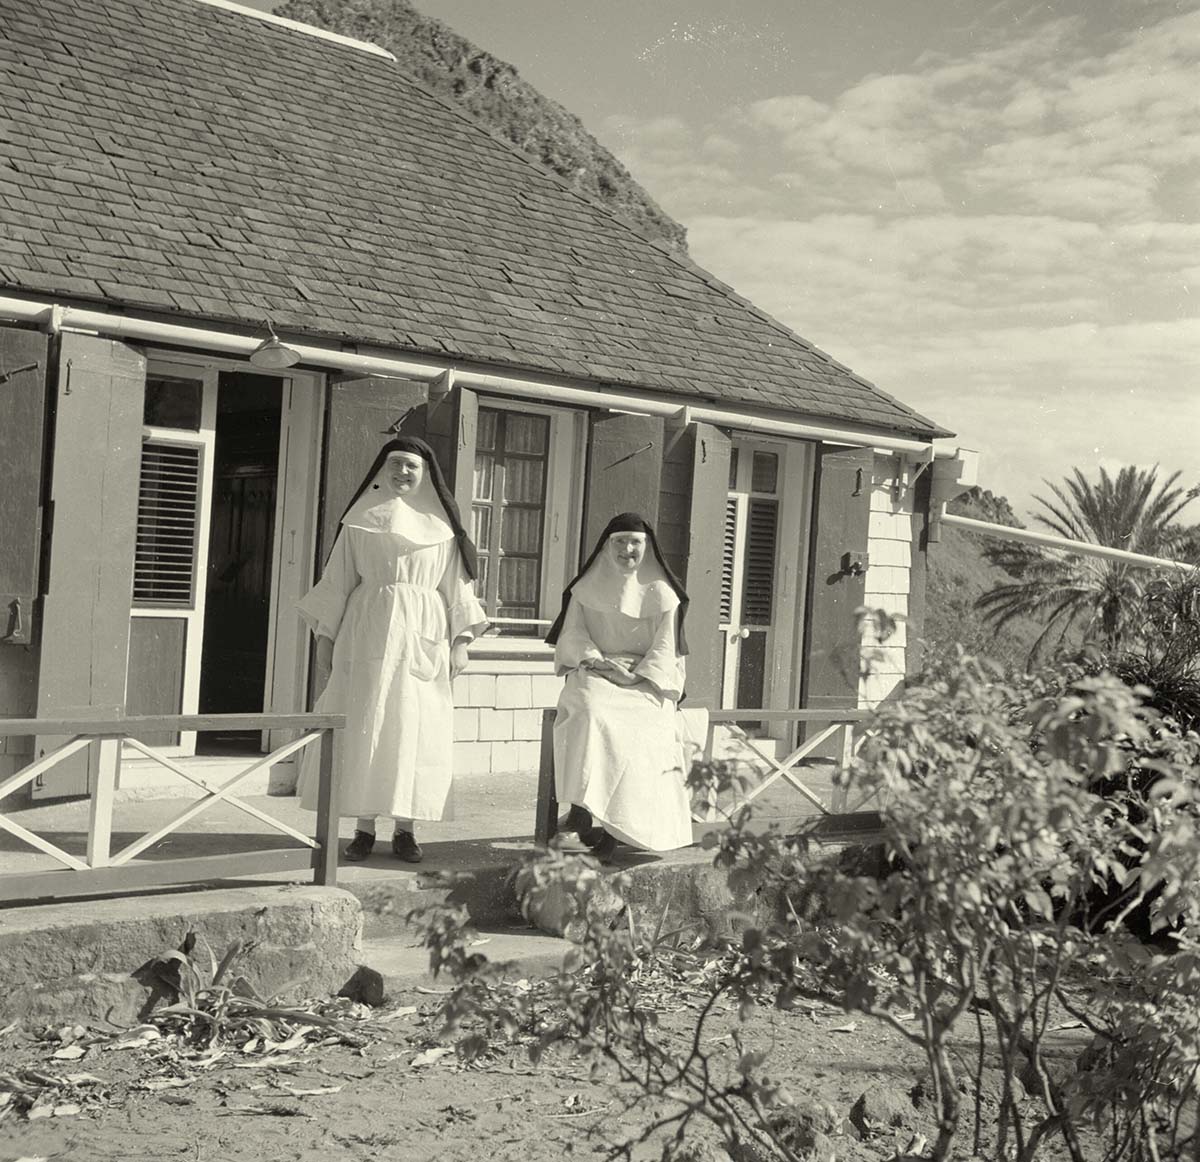 The Bottom. Two nuns at a house, 1947